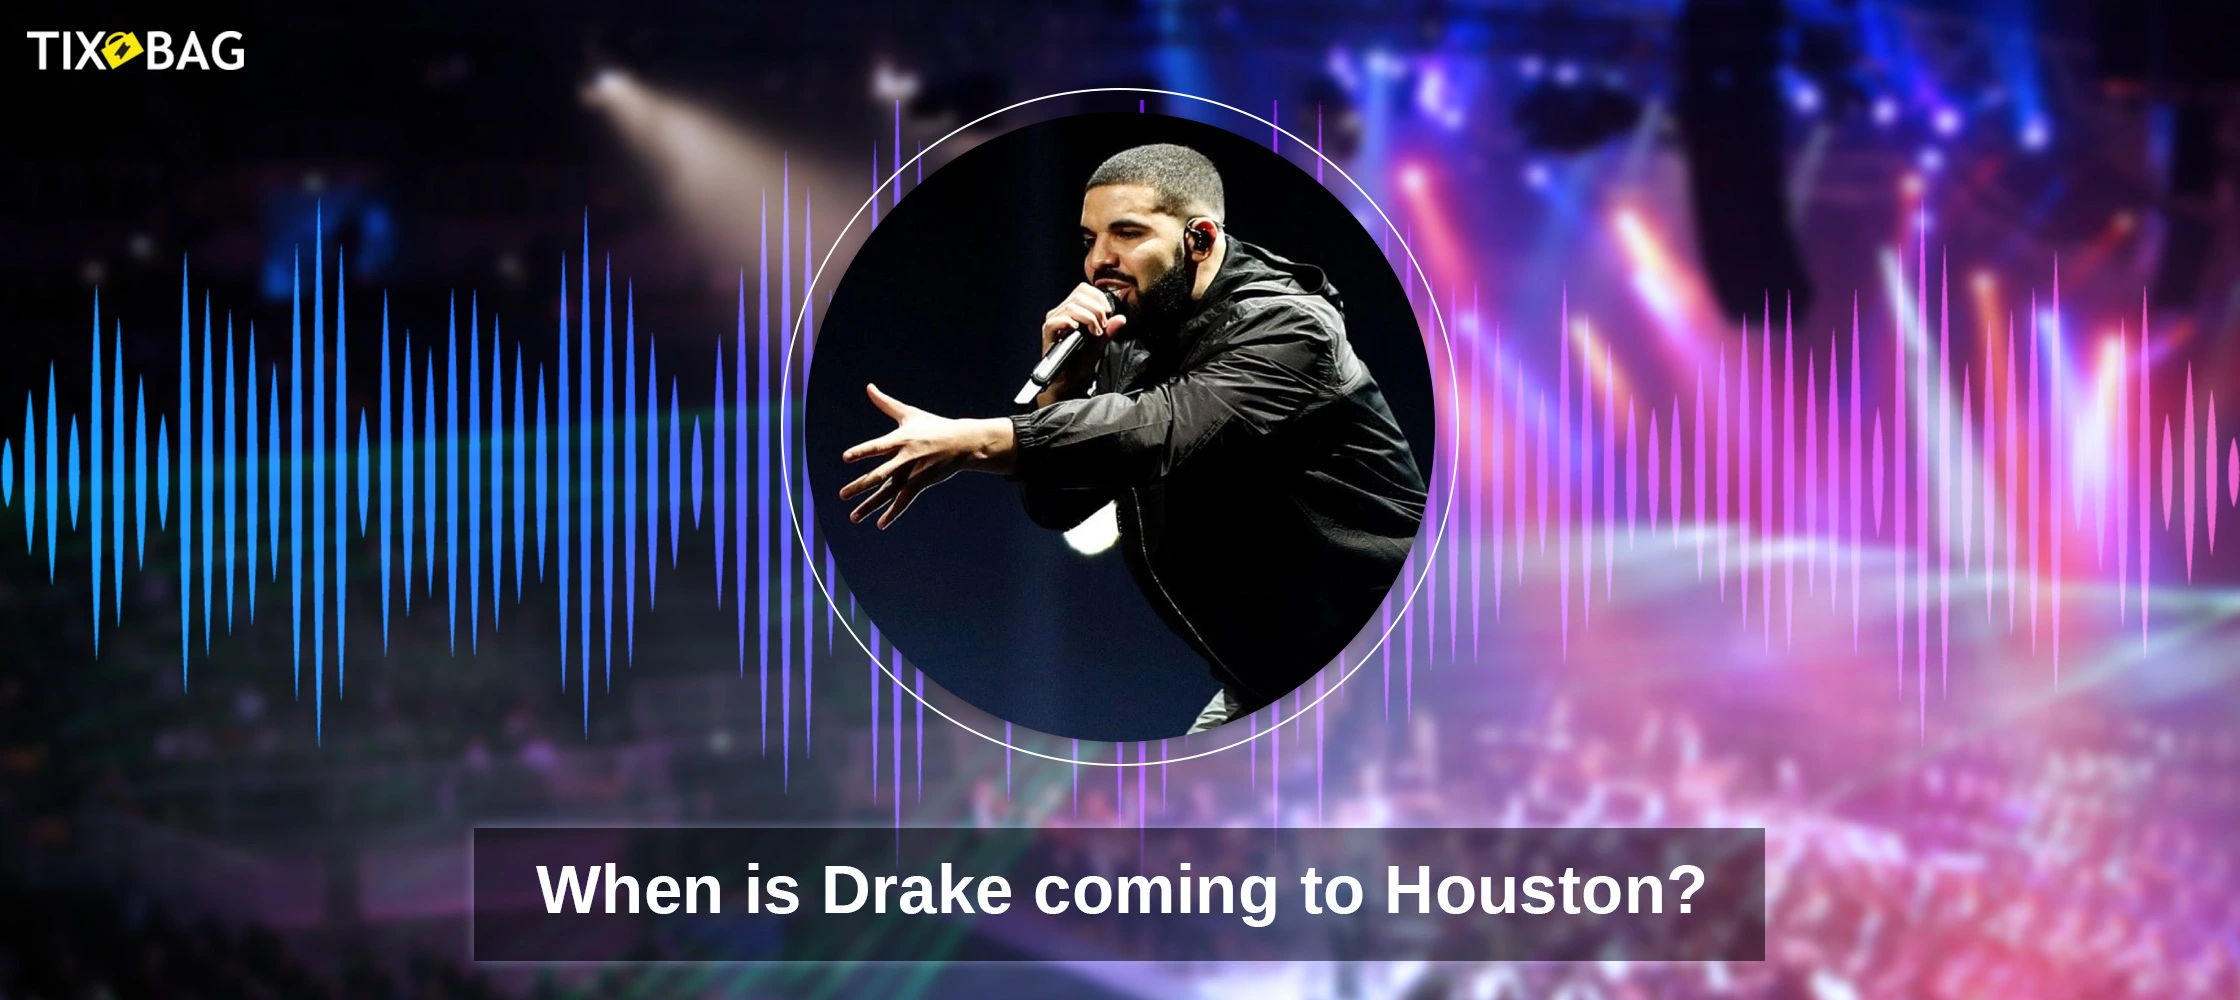 When is Drake coming to Houston?